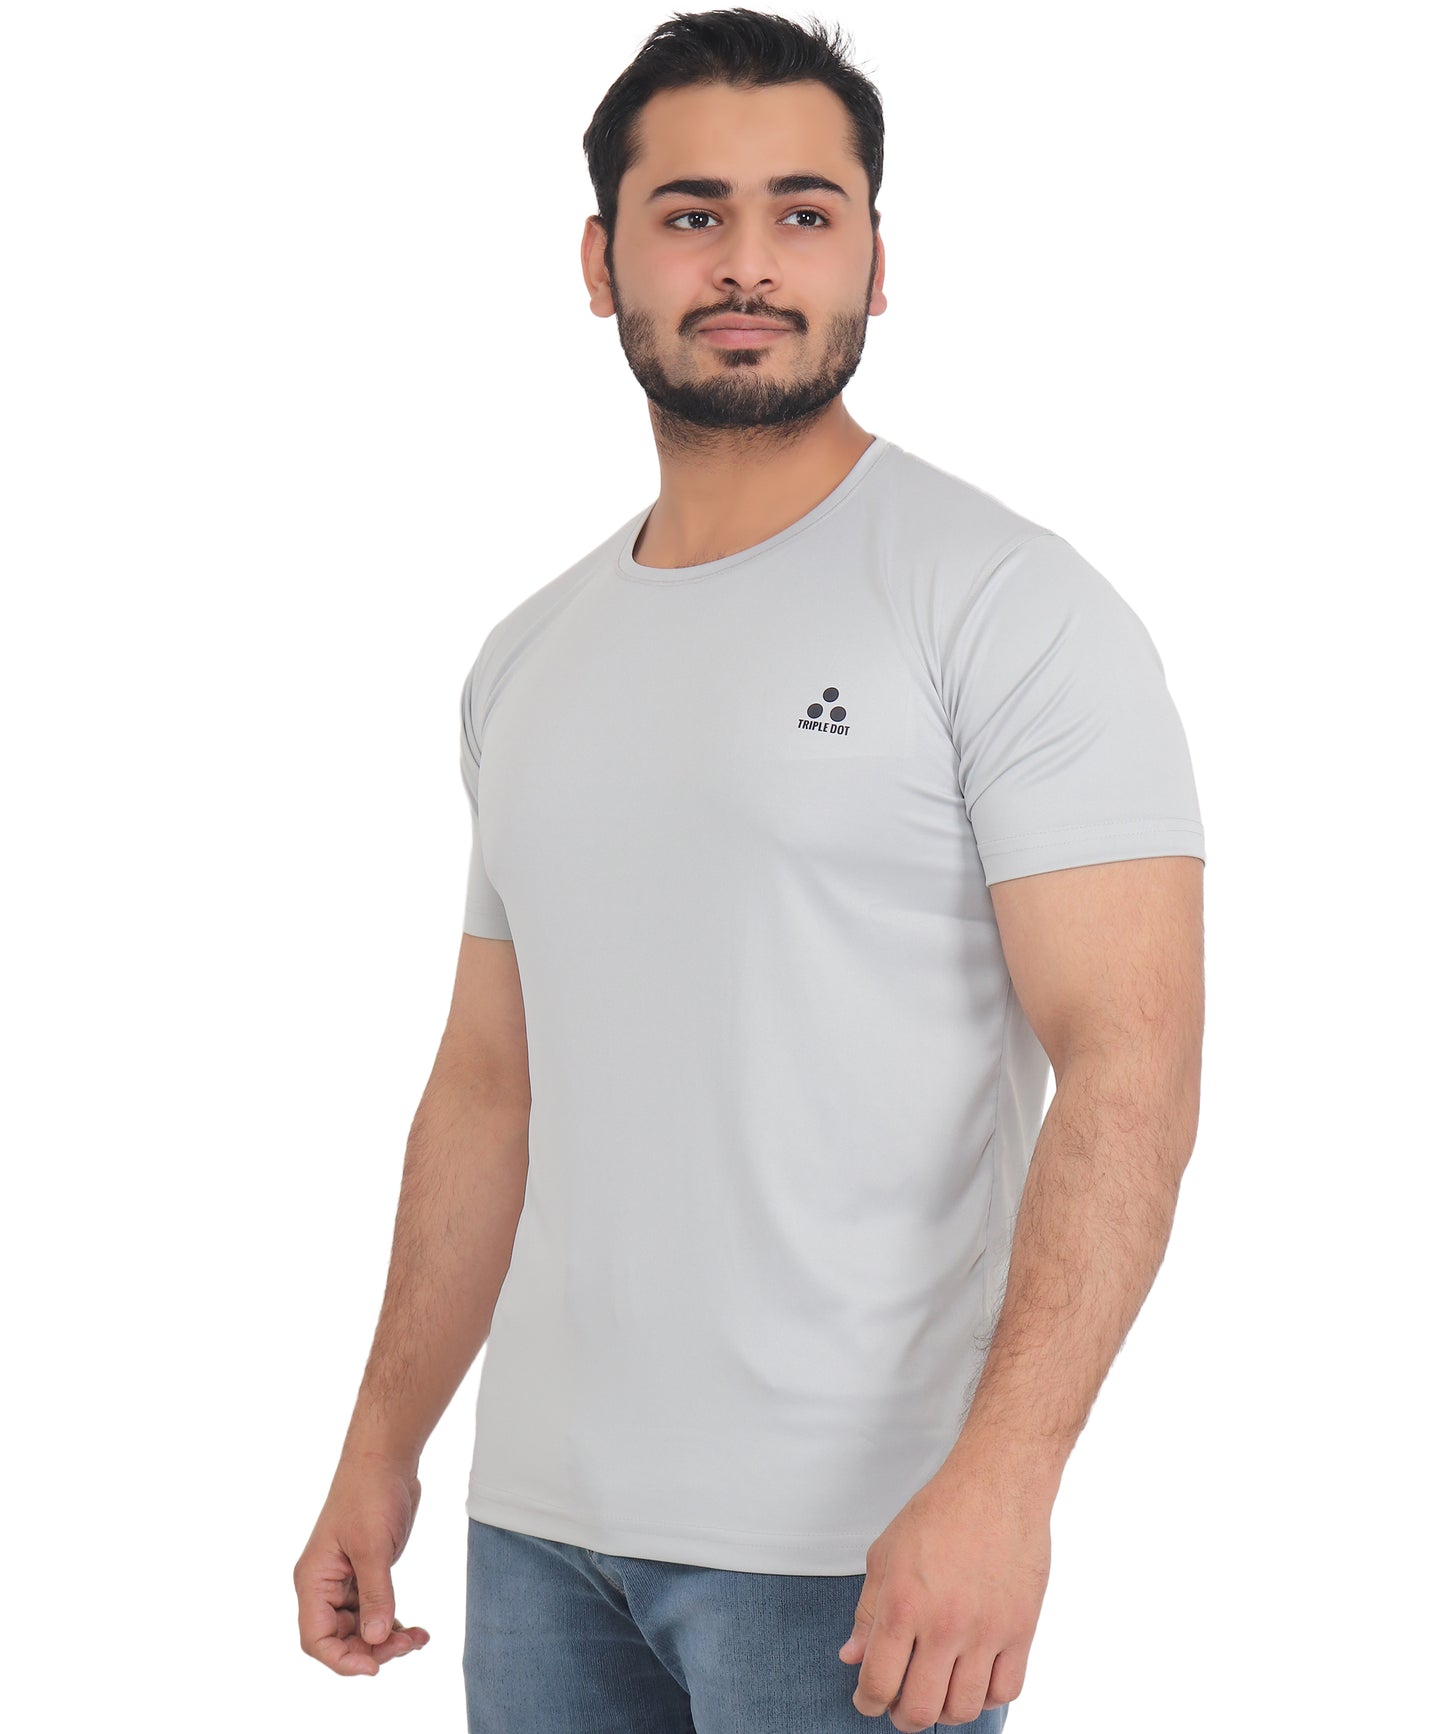 Solid Plain Tshirts for Men - Round Neck, Half Sleeves - Triple Dot Clothings